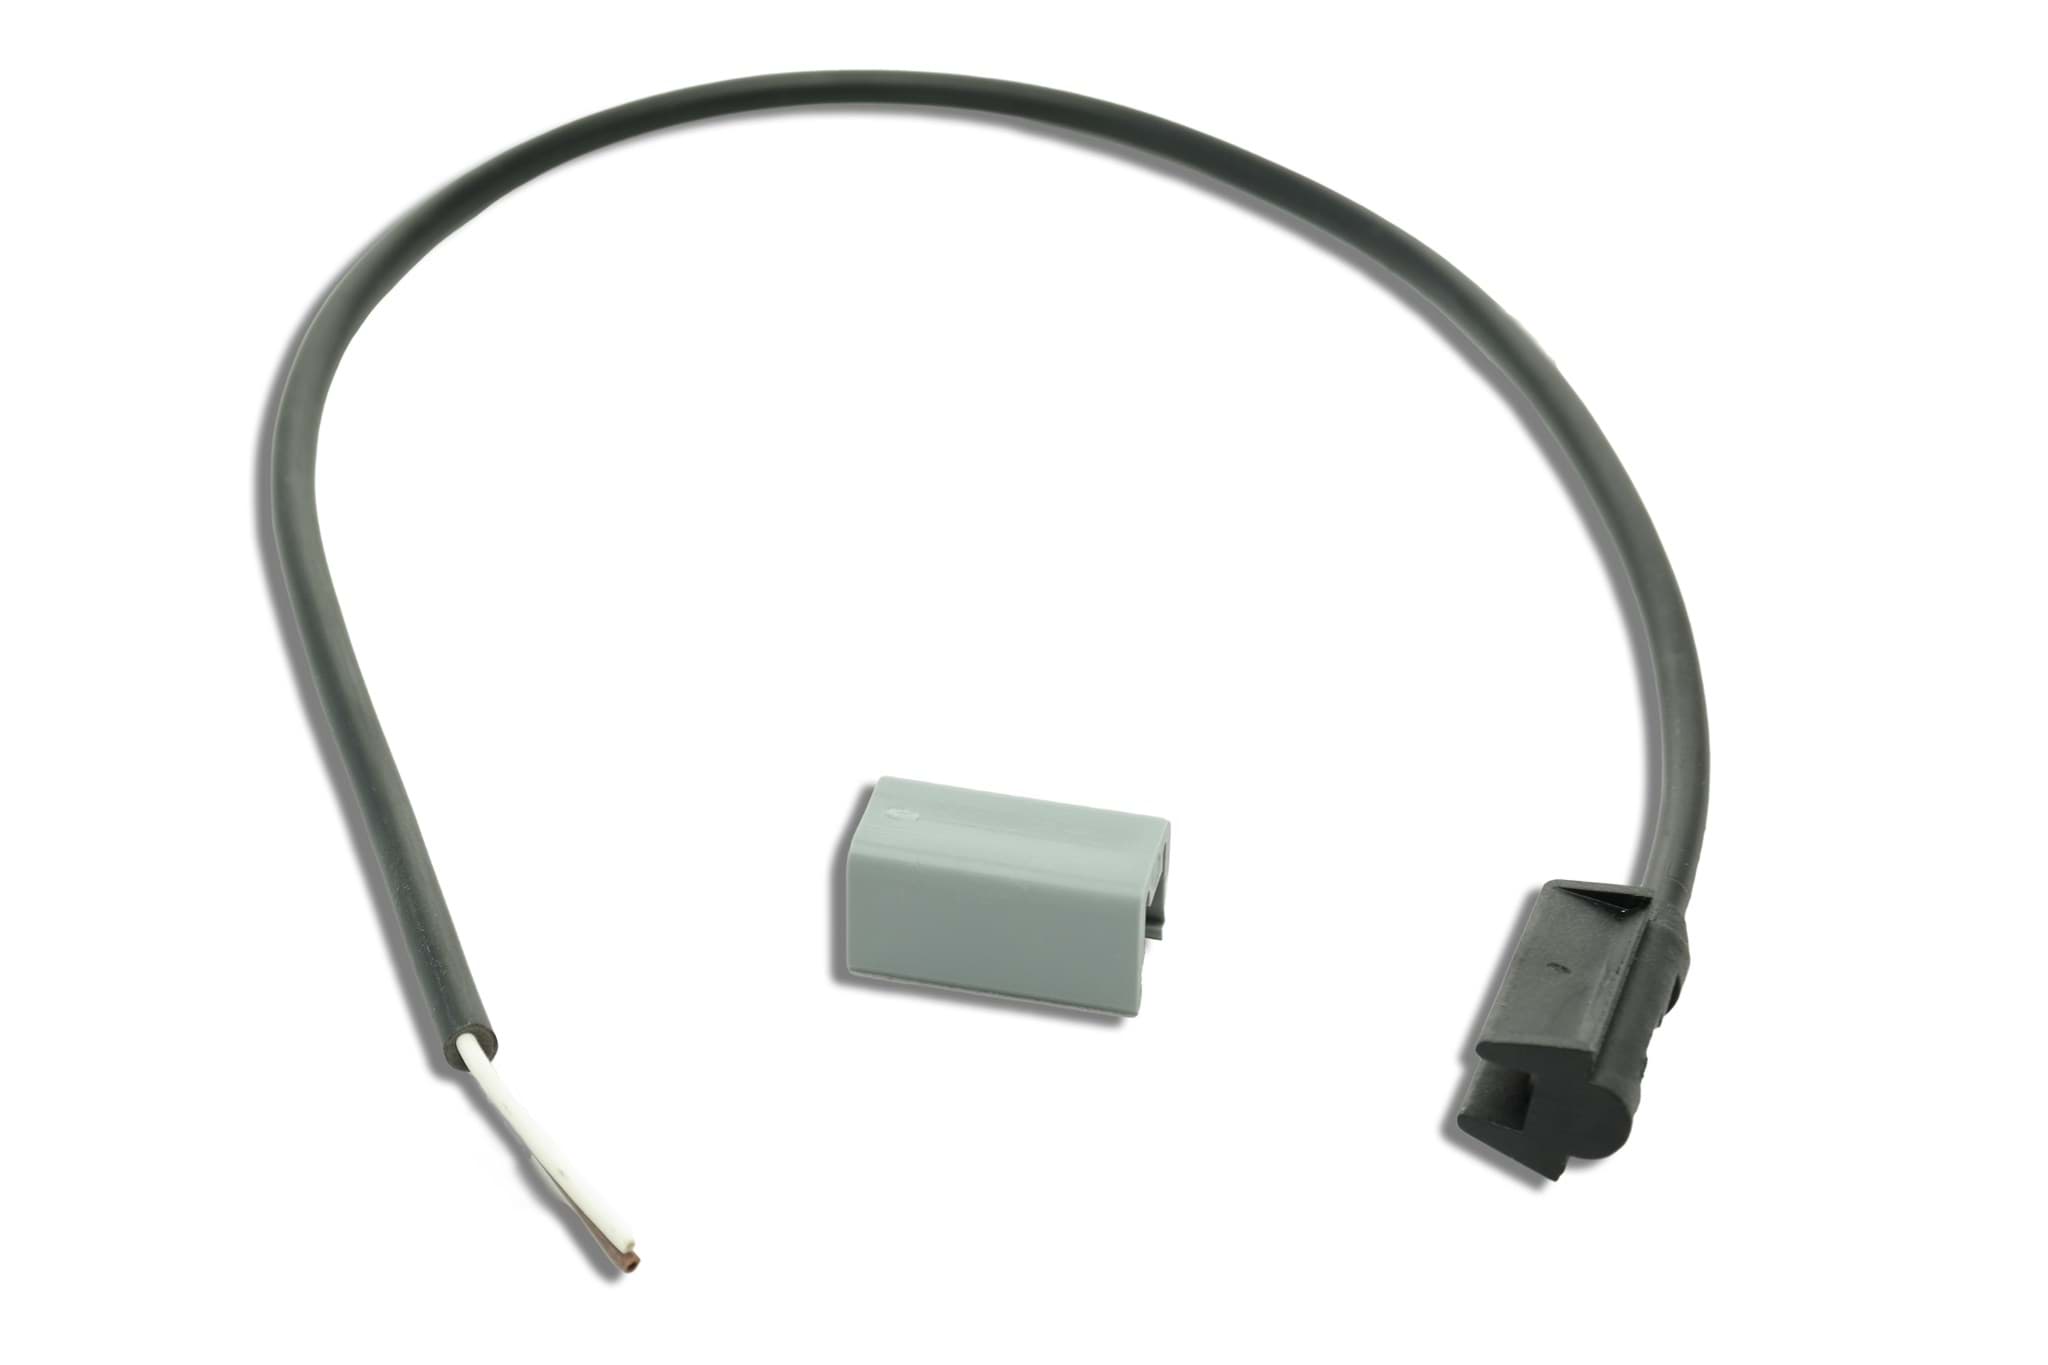 Picture of Adapter Kabel 1 m openEnd  P&R Aspöck 68-5000-024